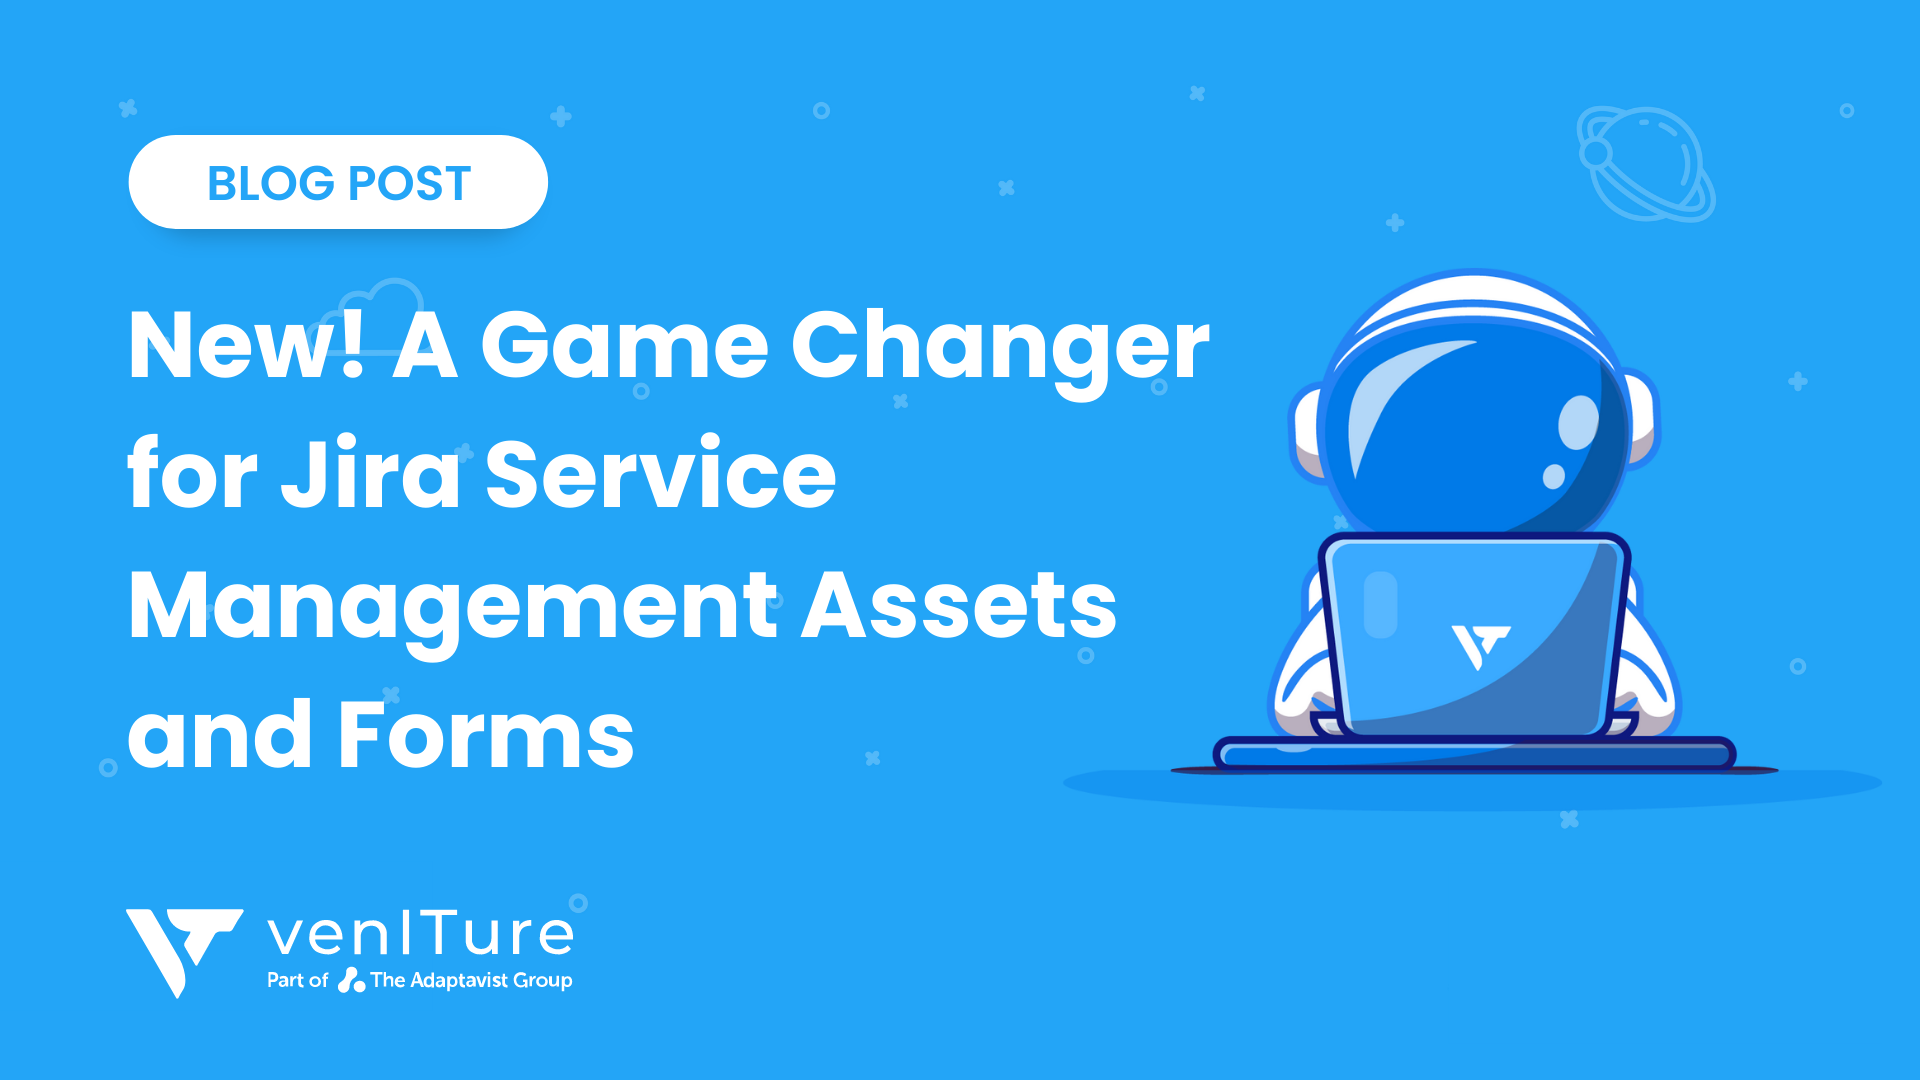 New! A Game Changer for Jira Service Management Assets and Forms